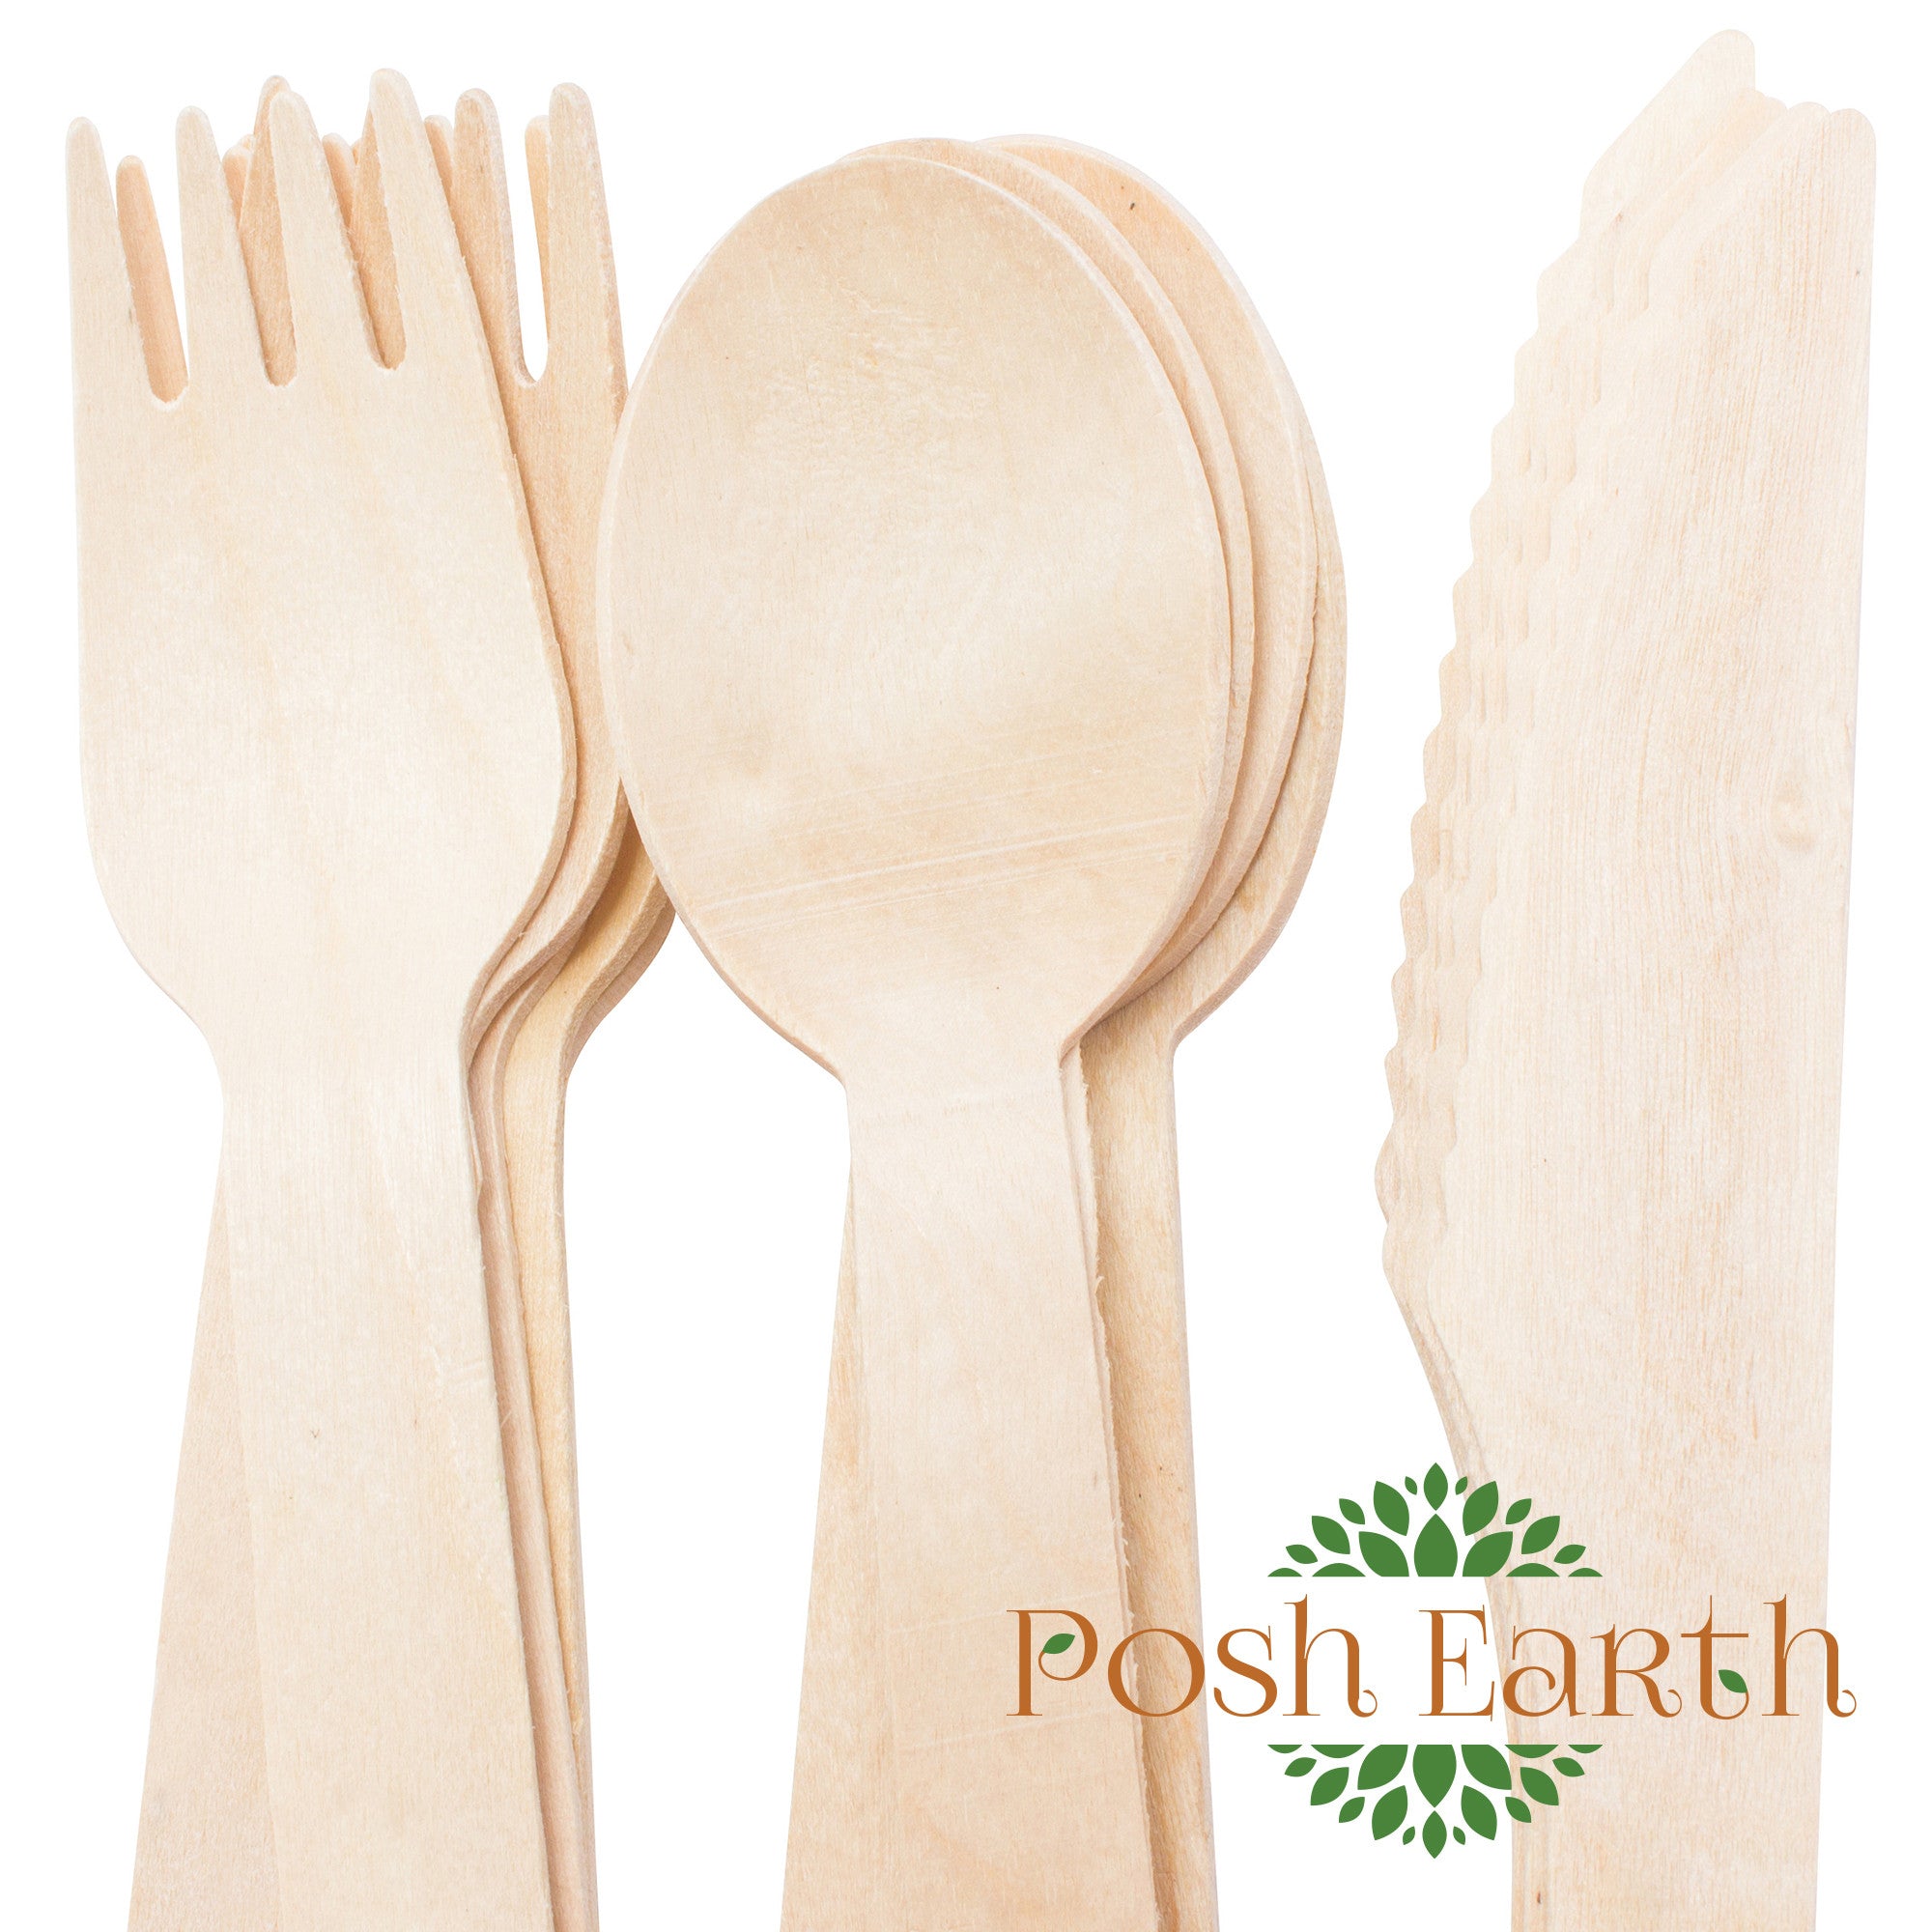 Disposable Wooden Cutlery | 250pc Set w/100 Spoons; 100 Forks; 50 Knives | Great for Parties